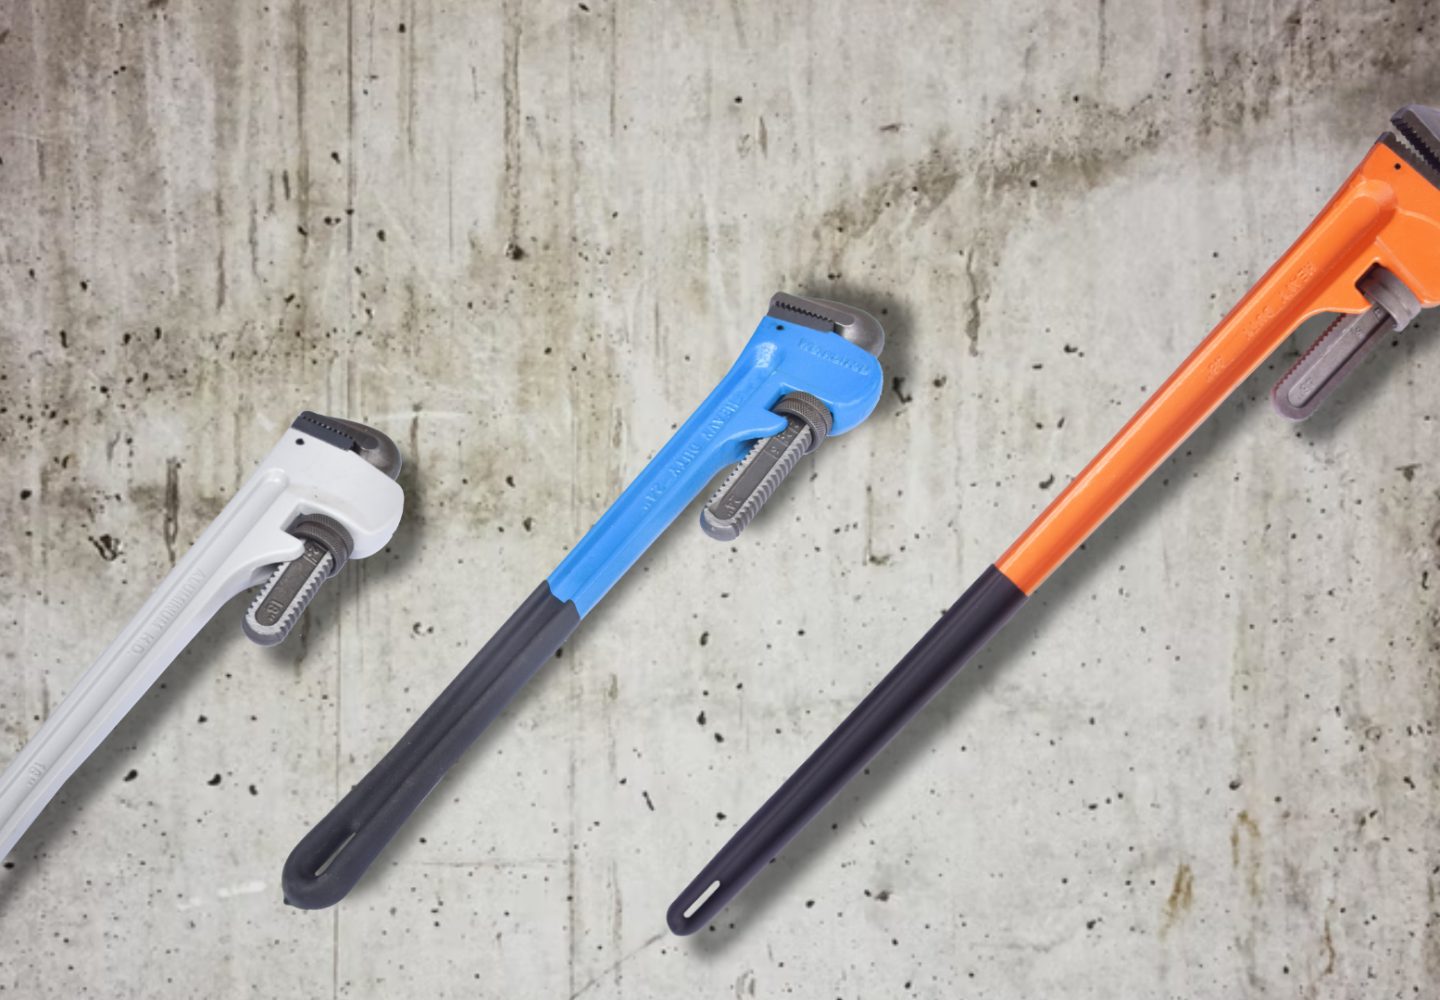 The type of pipe wrench for leaking pipe solutions